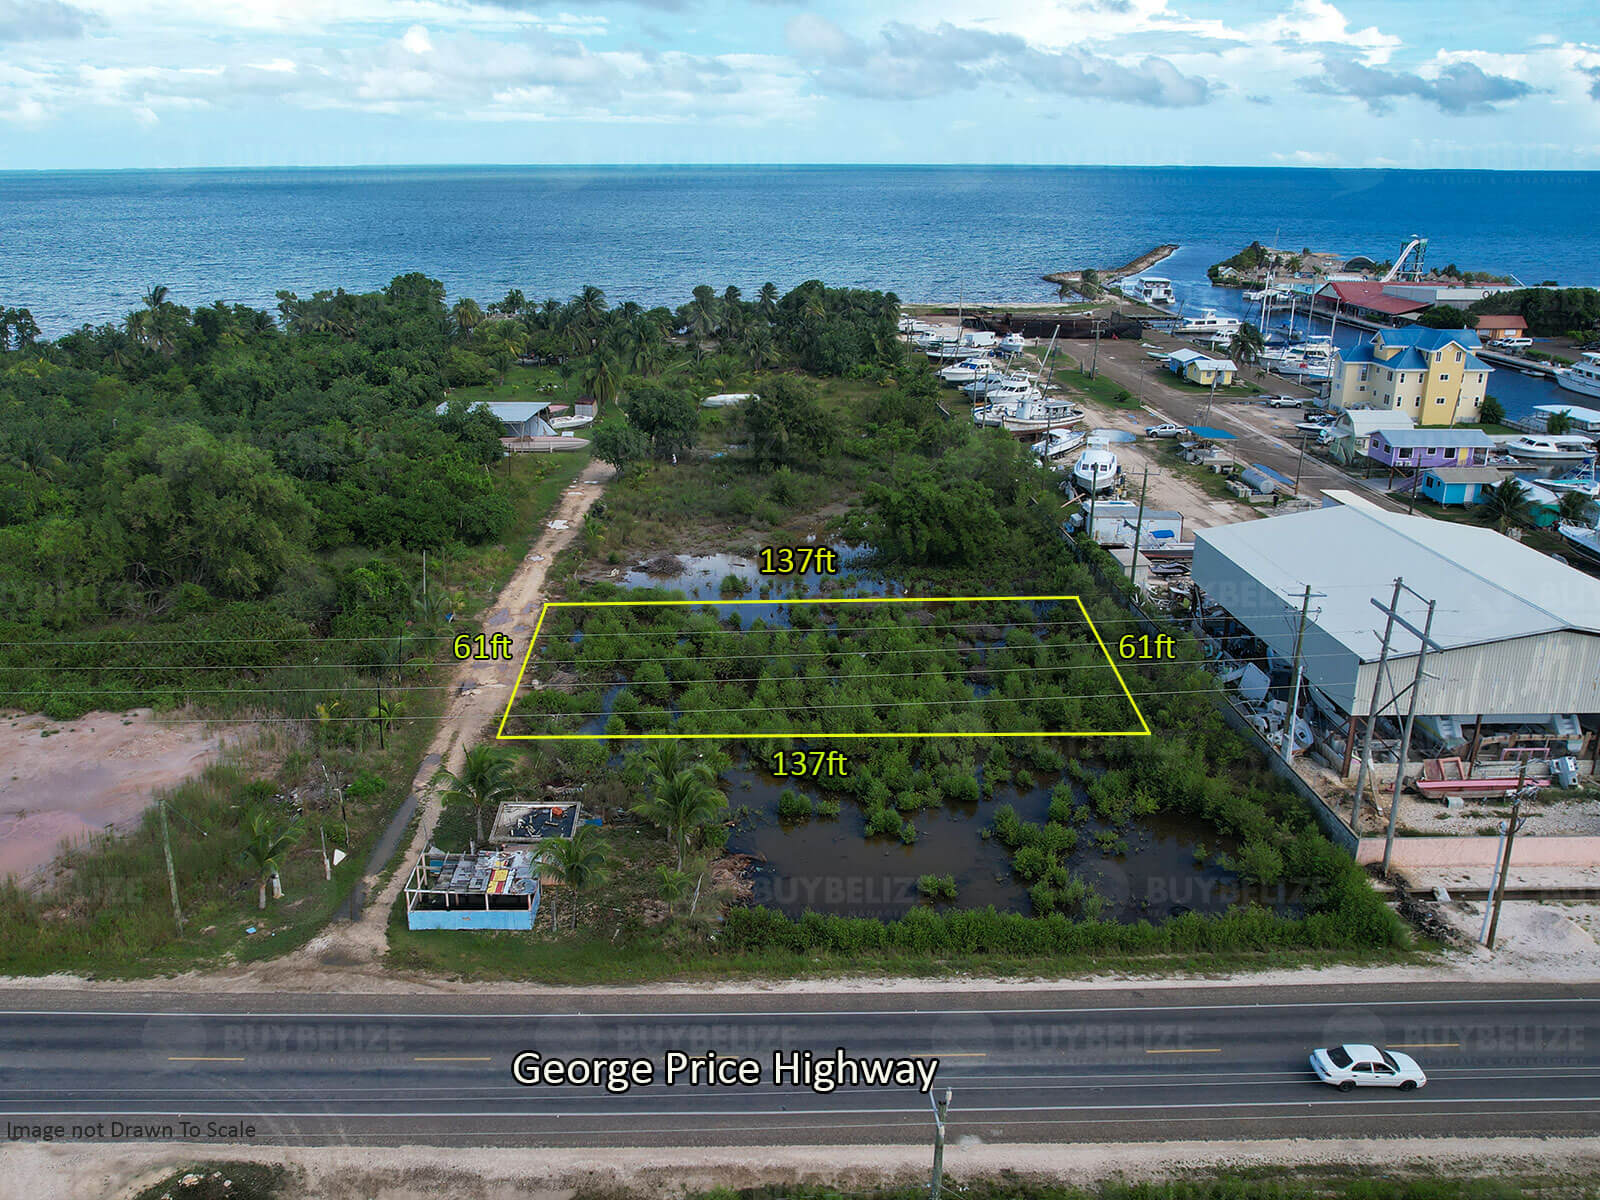 Land for Sale on the George Price Highway